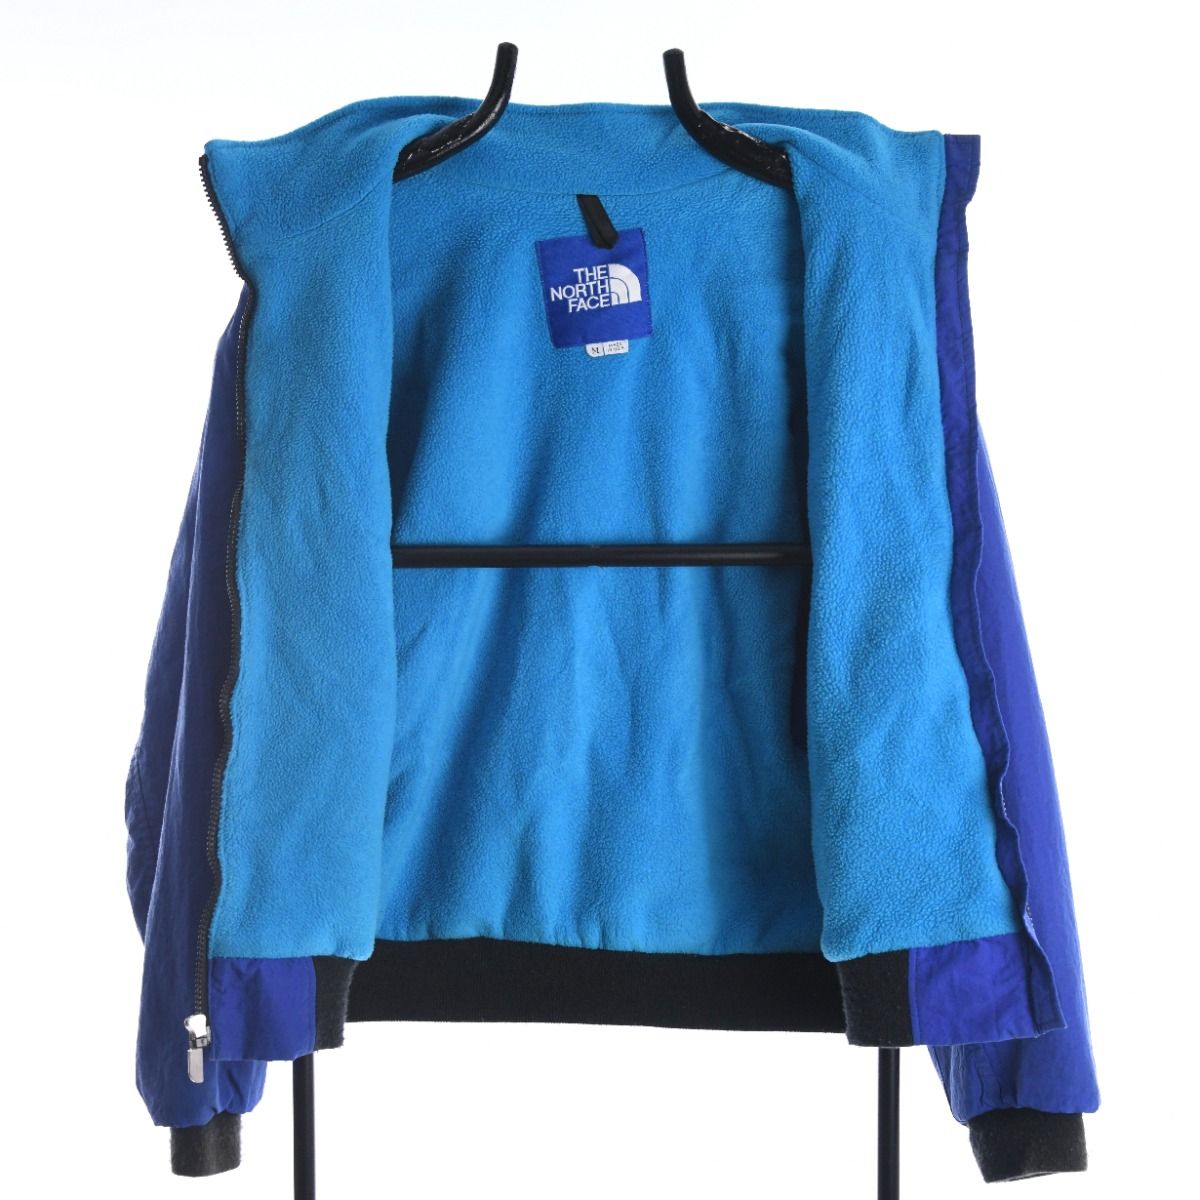 The North Face 1980s Jacket